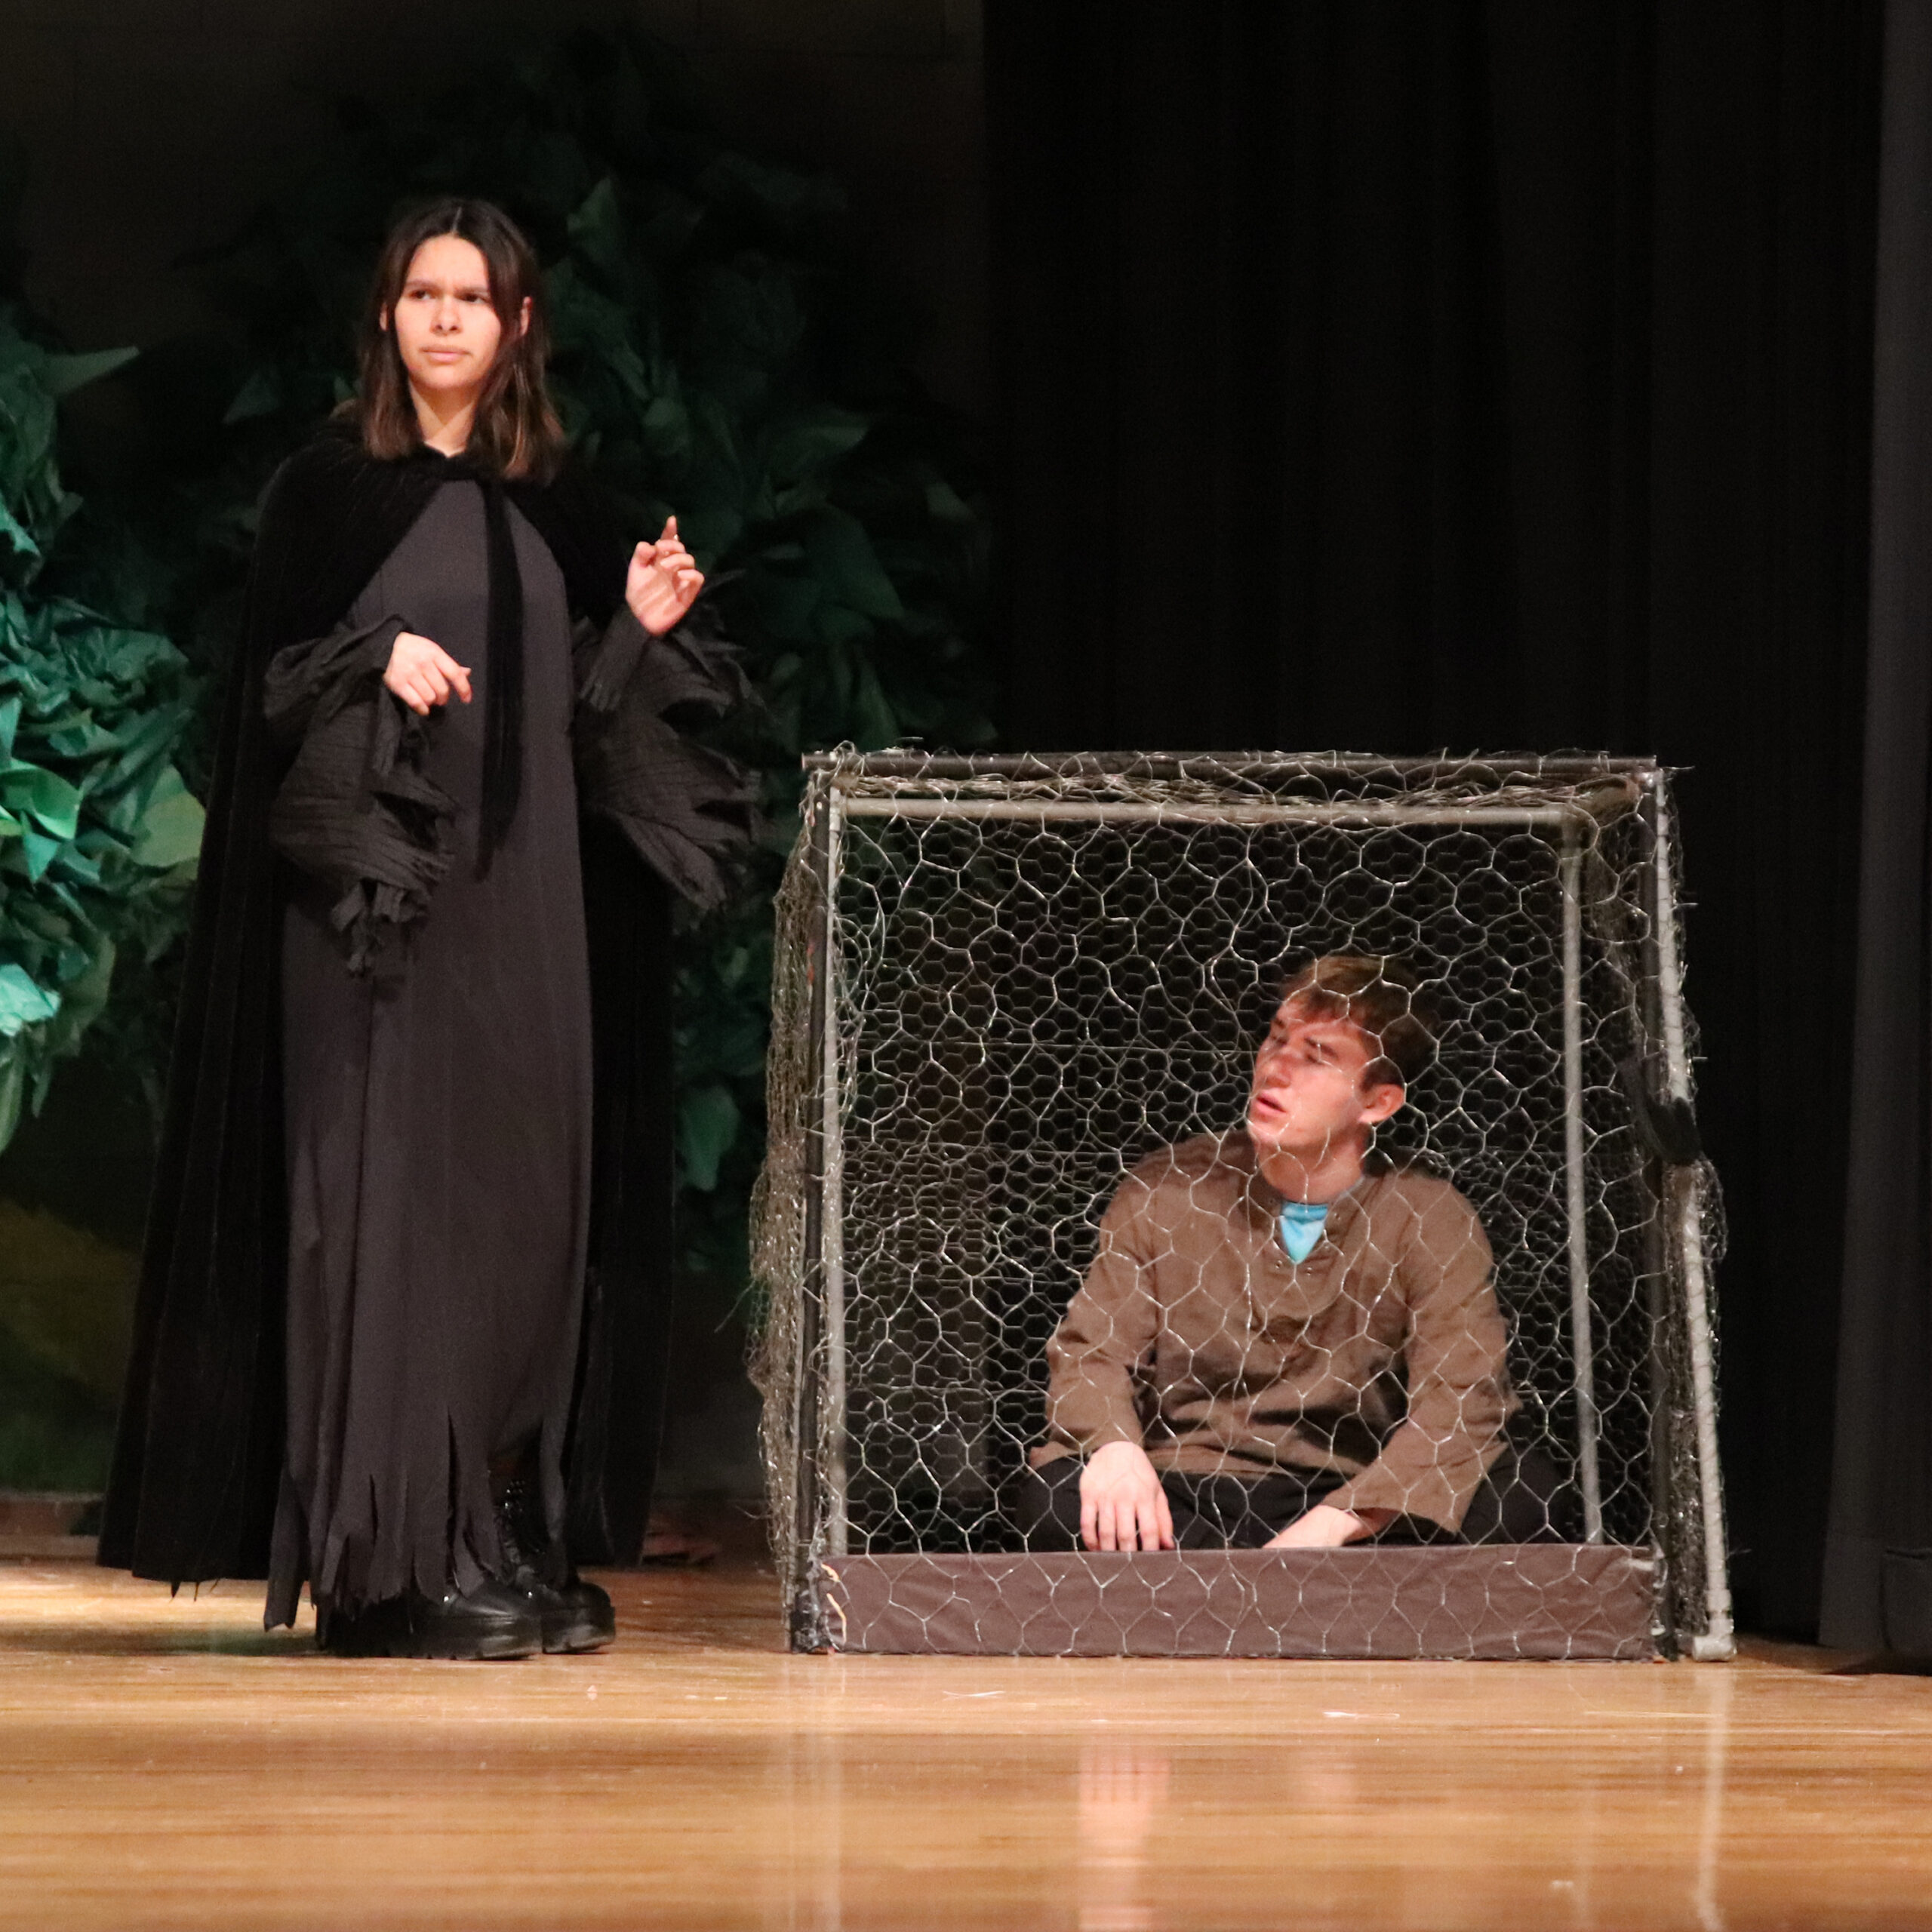 Jacob Woolsey trapped in a cage by Selena Huerta in costume as the Gingerbread Witch / The Brand • Raegan Terry 